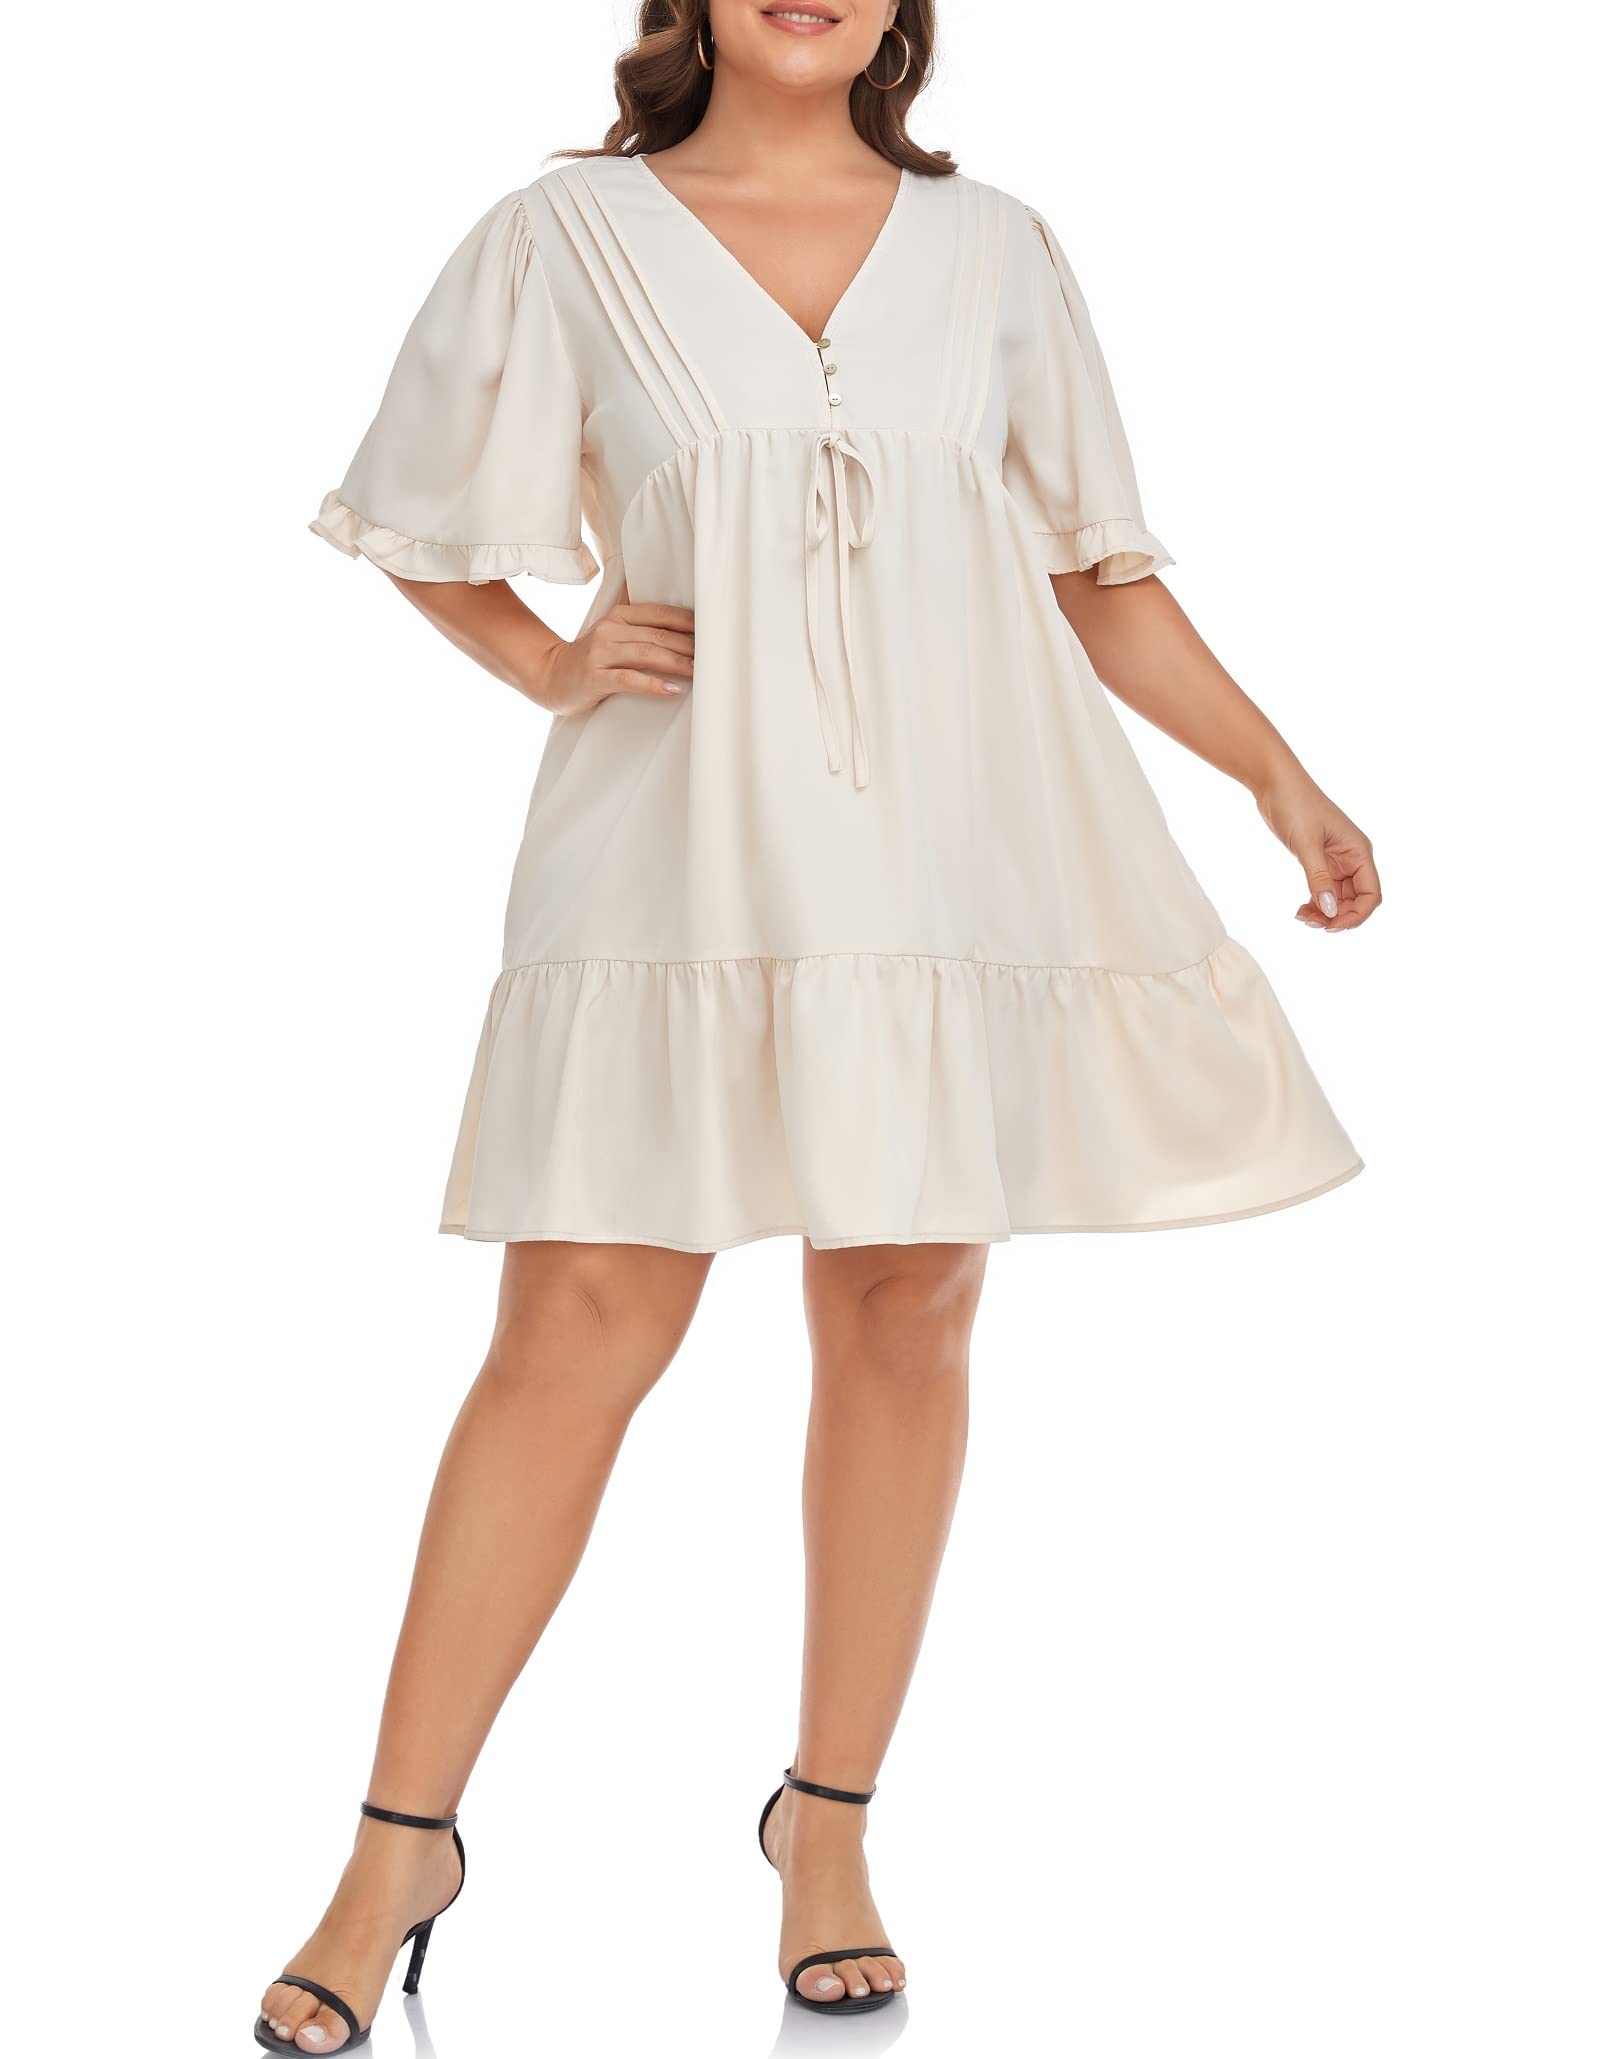 Carrdc Women's Summer Plus Size V Neck Button Down Front Ruffle Sleeve Pleated Dress